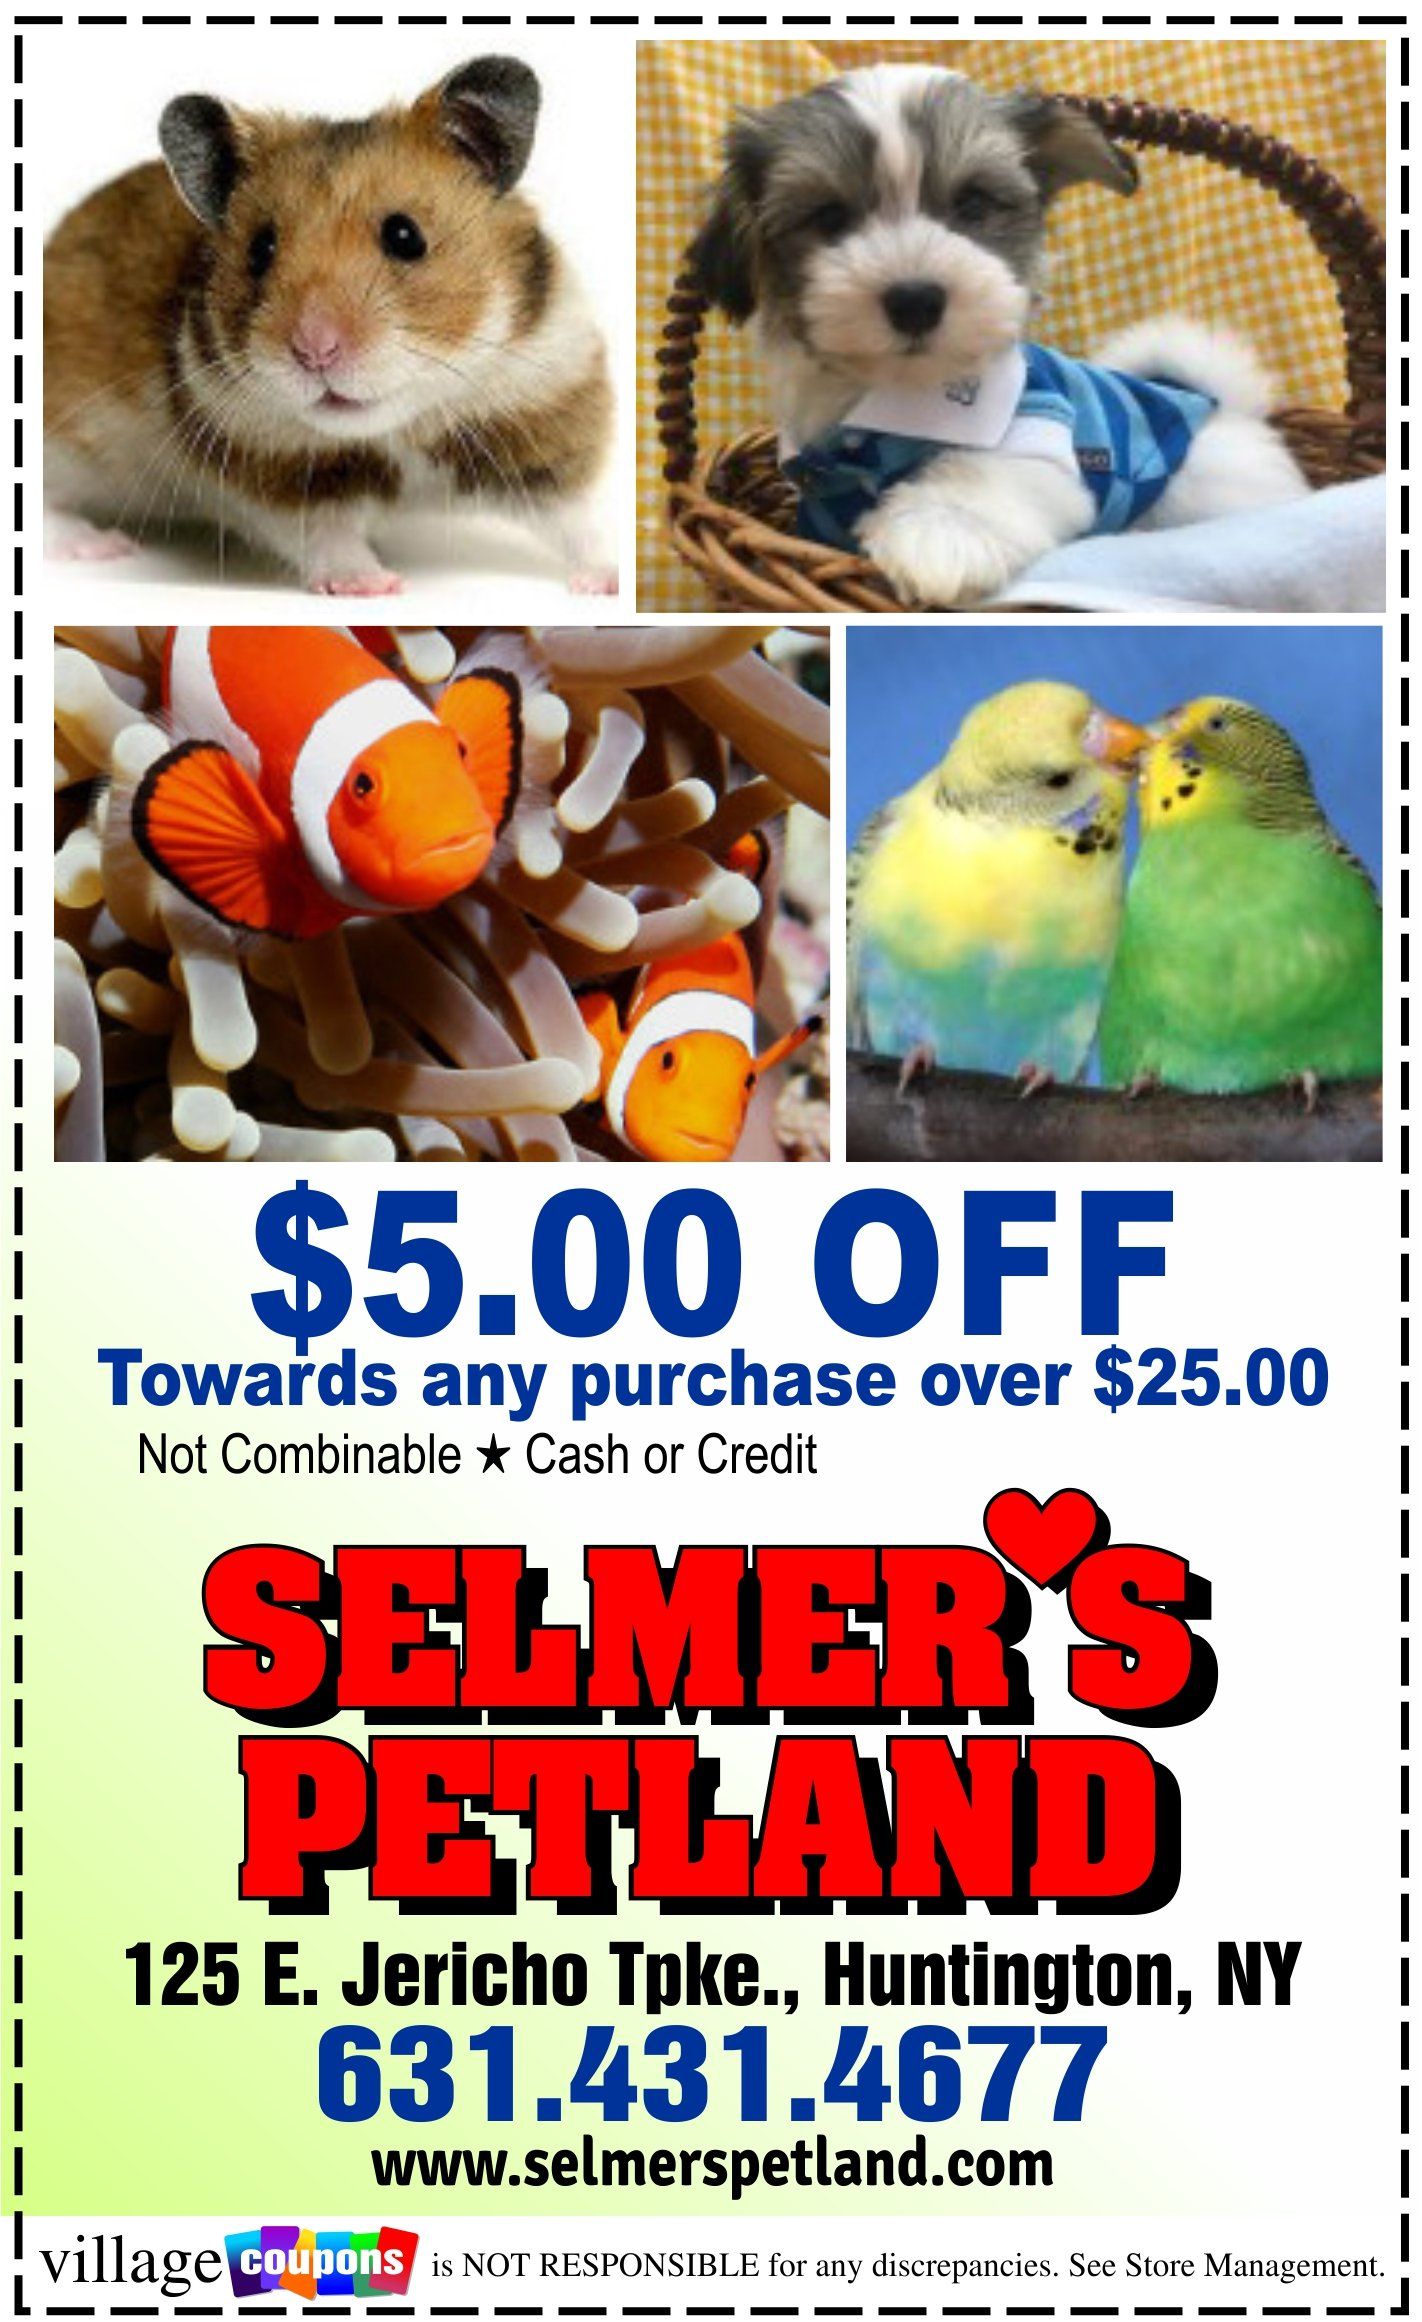 A coupon for selmer 's petland in huntington new york